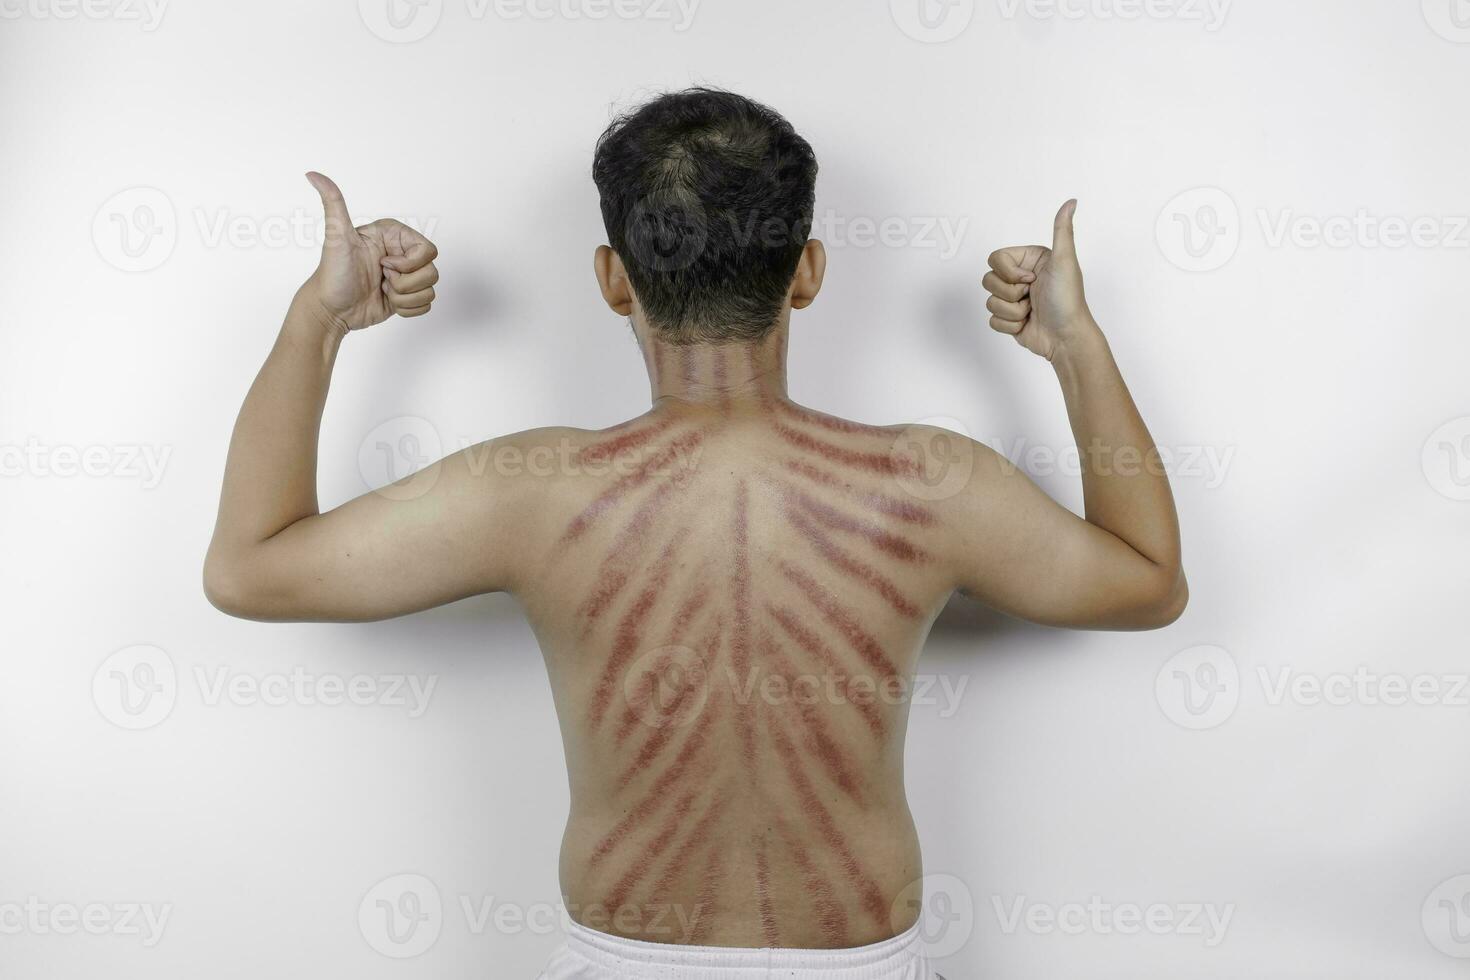 Red marks from scrapes coin on a man's back. Kerokan is a way of traditional Javanese culture medical treatment to treat symptoms of colds in Indonesia photo